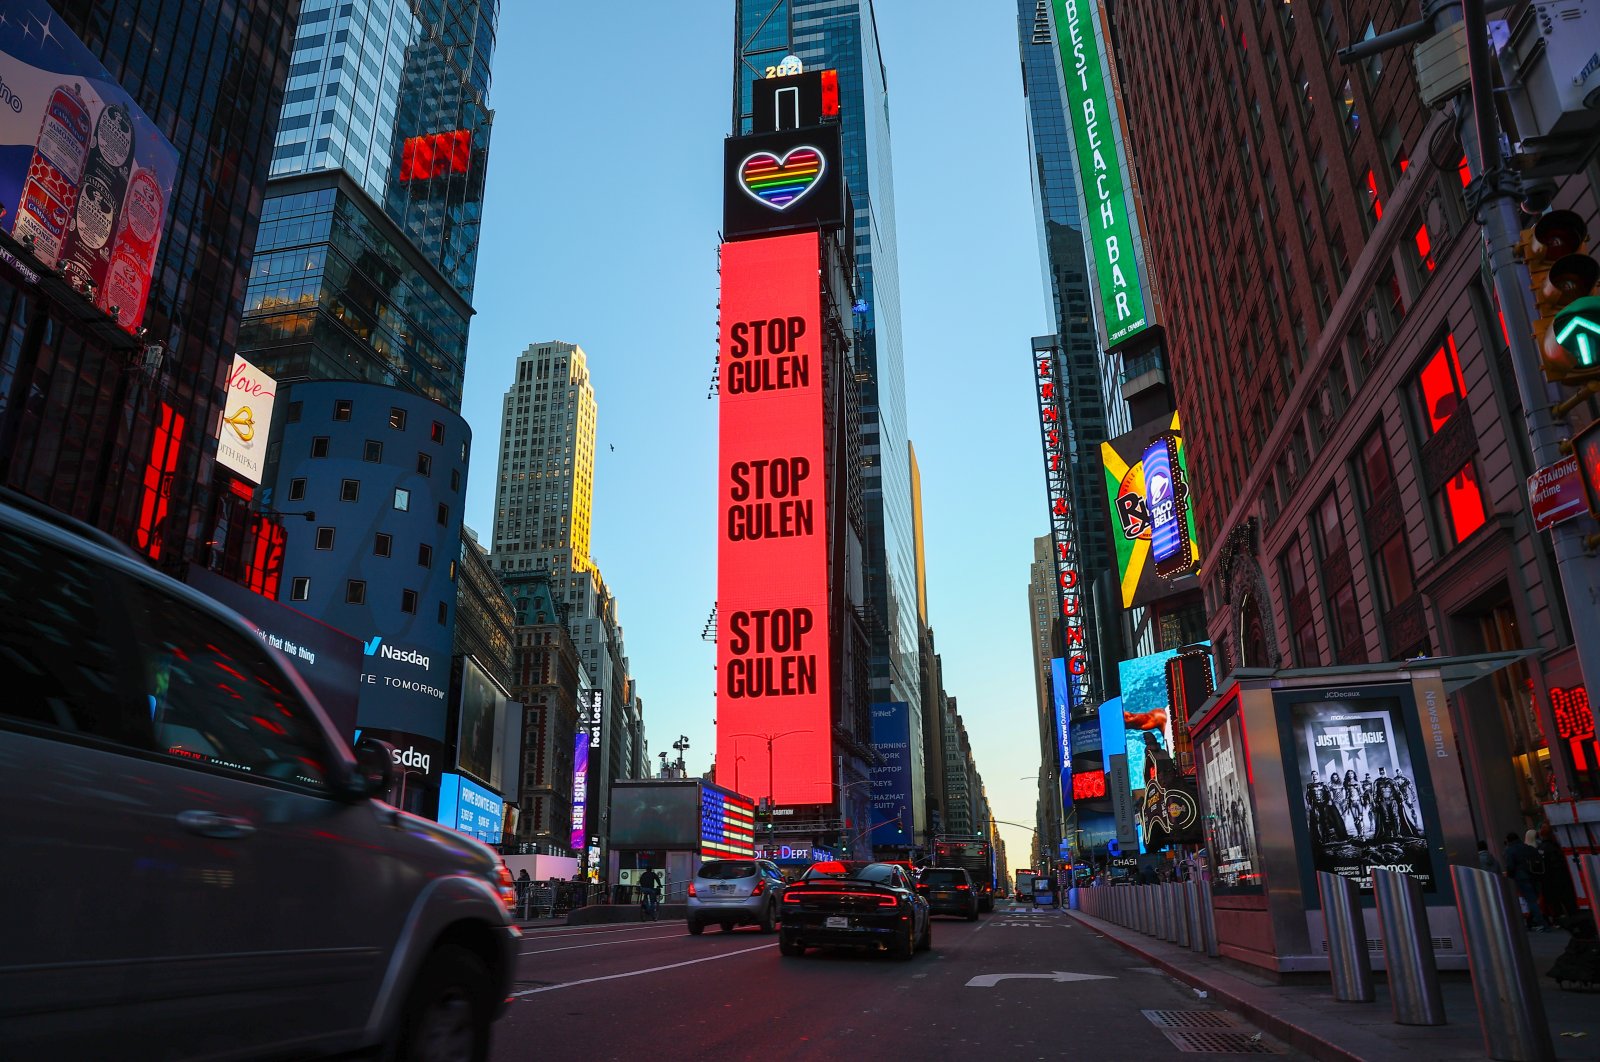 “Stop Gülen” ad displayed in NYC in response to FETÖ defamation